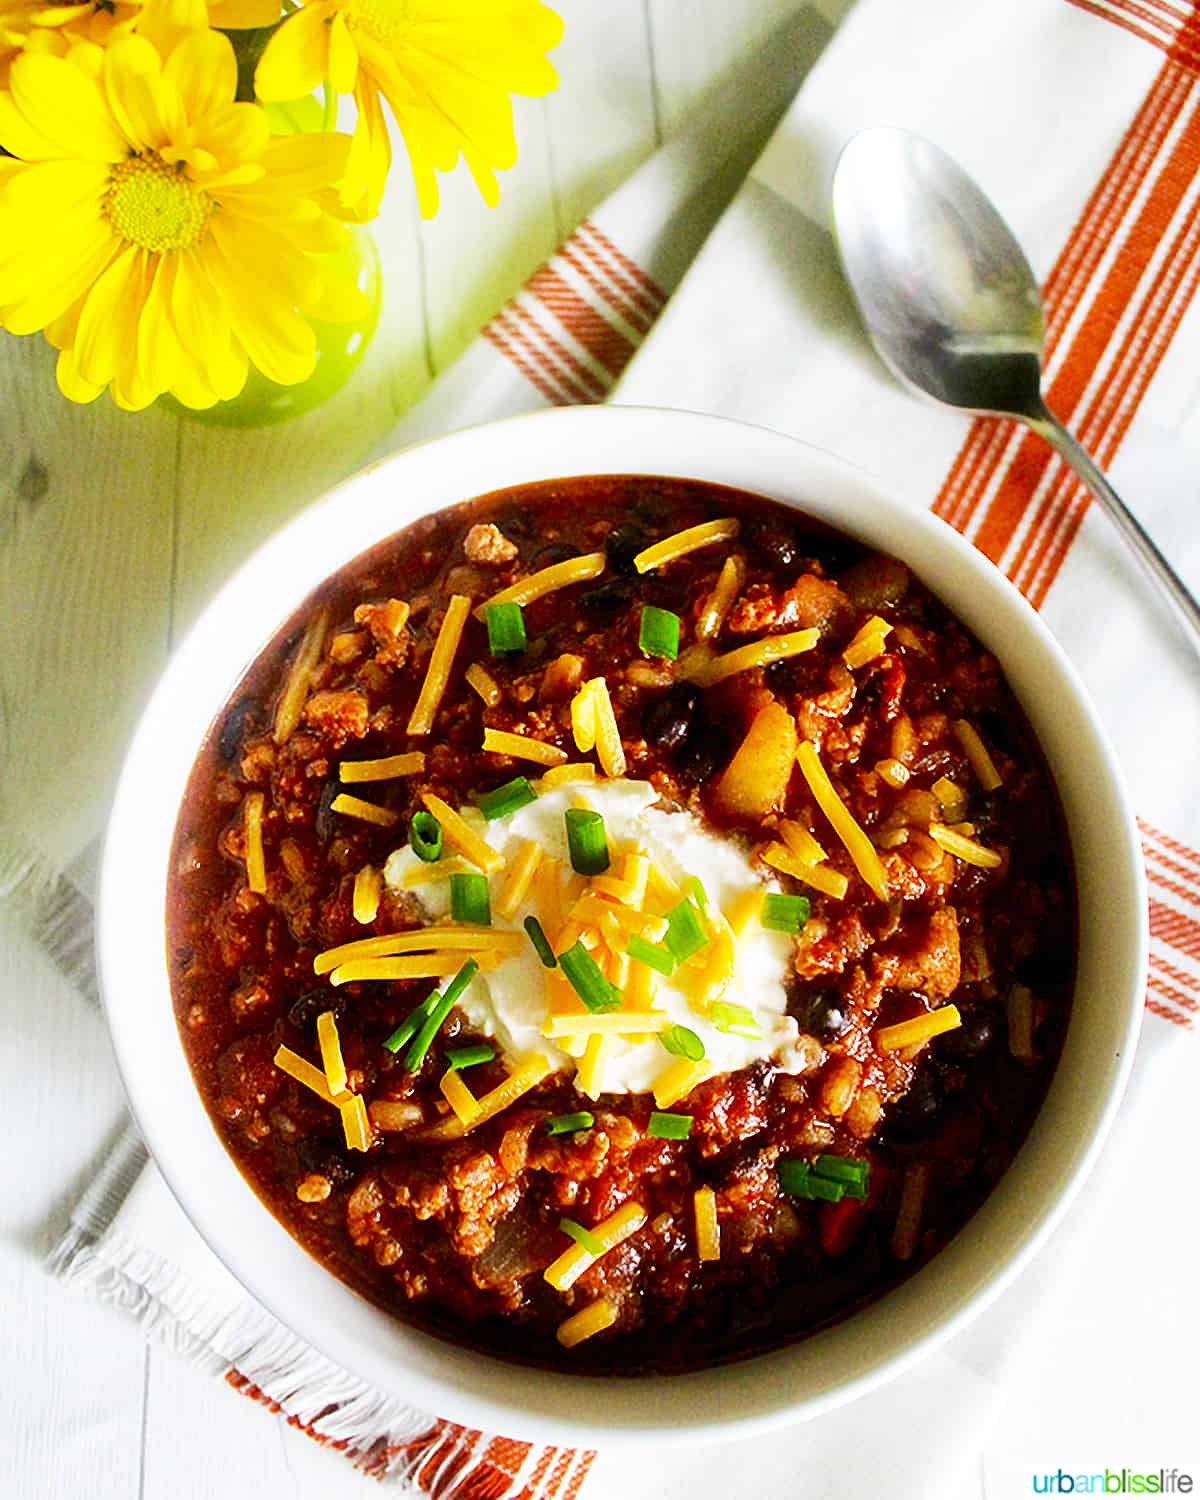 bowl of turkey chili with ground turkey, farro, stout, and toppings with a vase of yellow daisies.